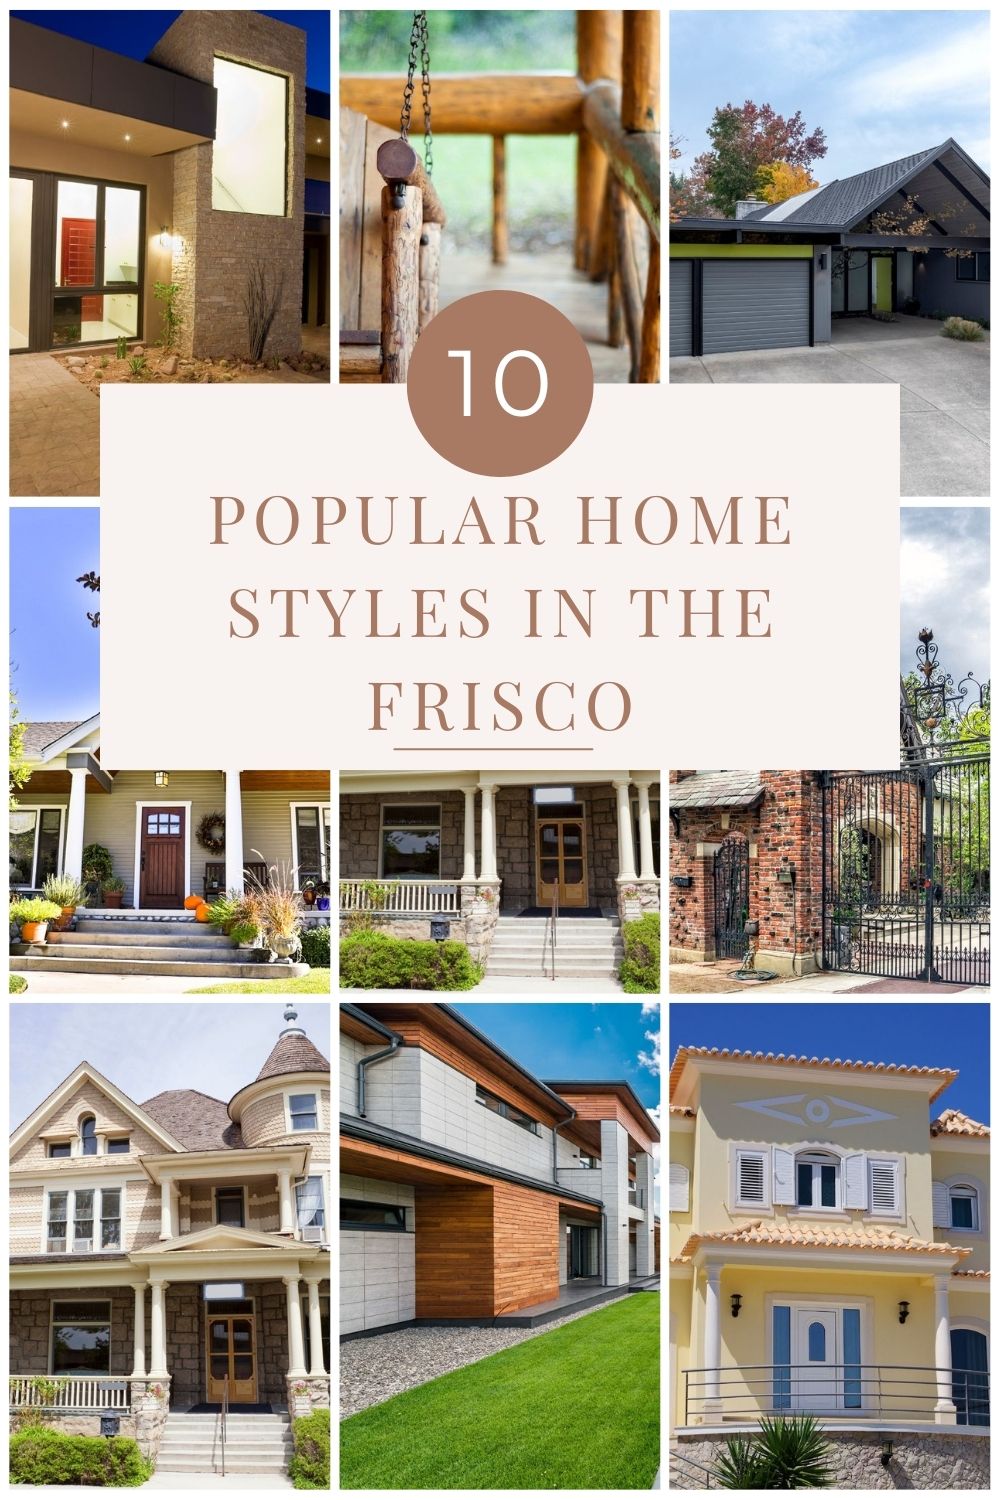 Popular Home Styles in the Frisco